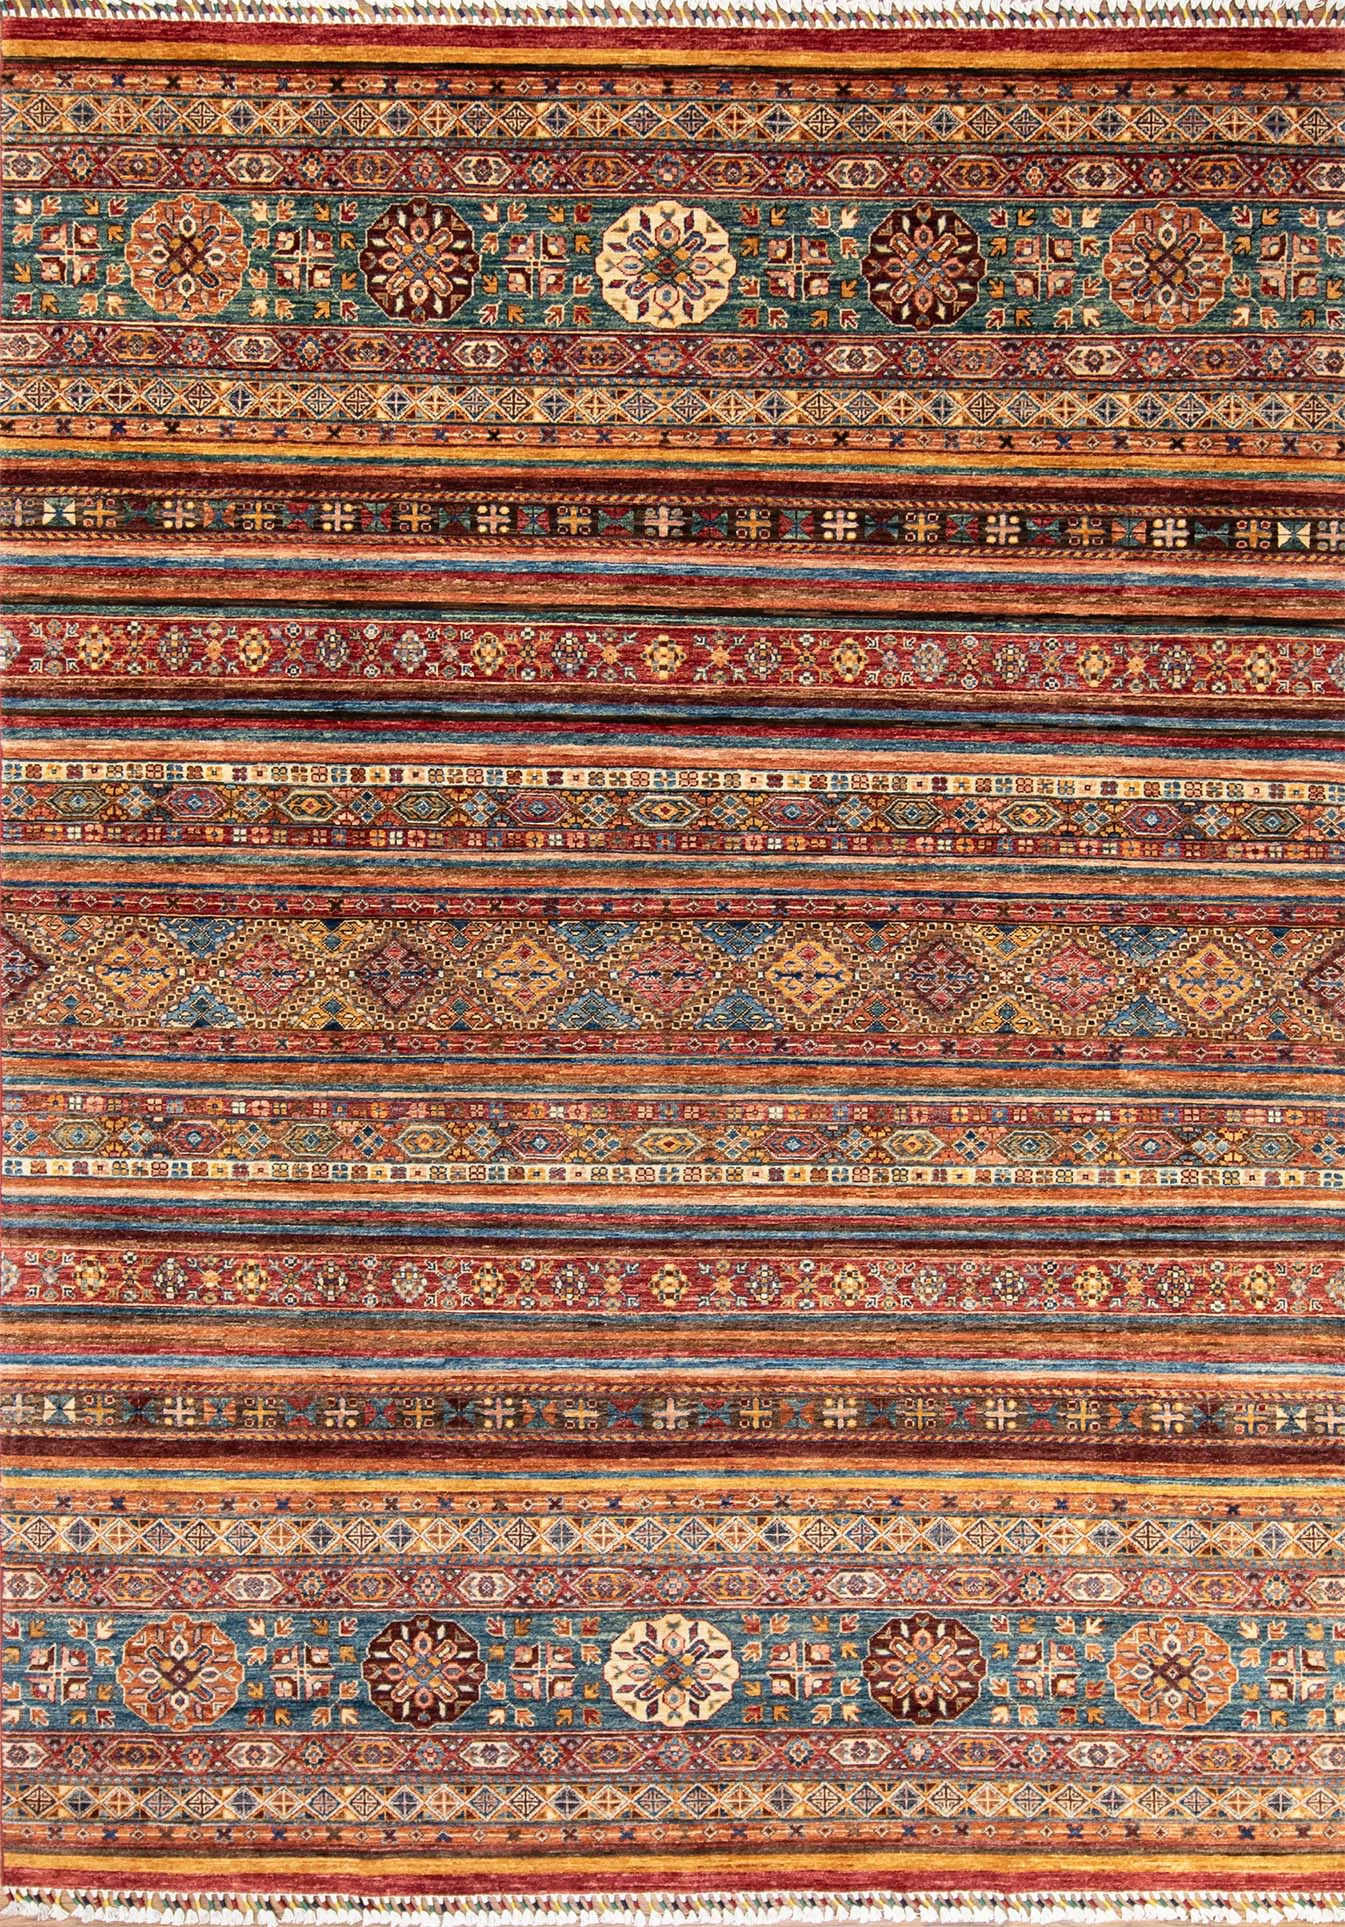 Oriental carpets. hand knotted wool multicolored carpet made in Pakistan. Size 6.8x10.8.